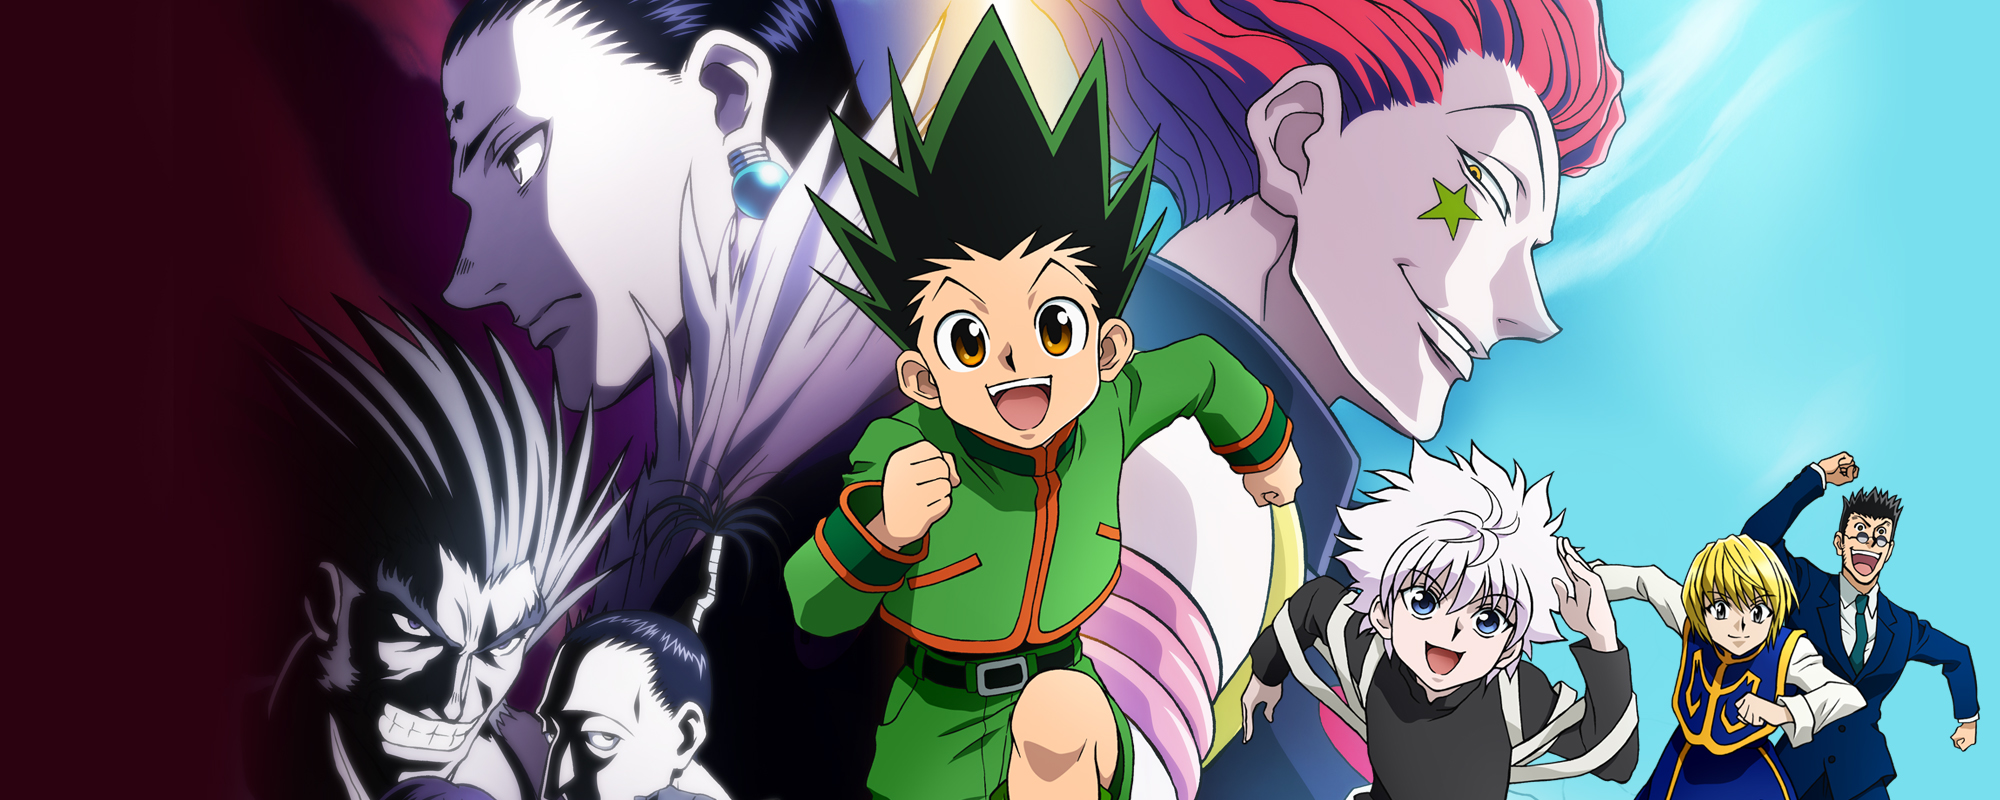 "hunter x hunter season 7" latest update, Release date, cast and review